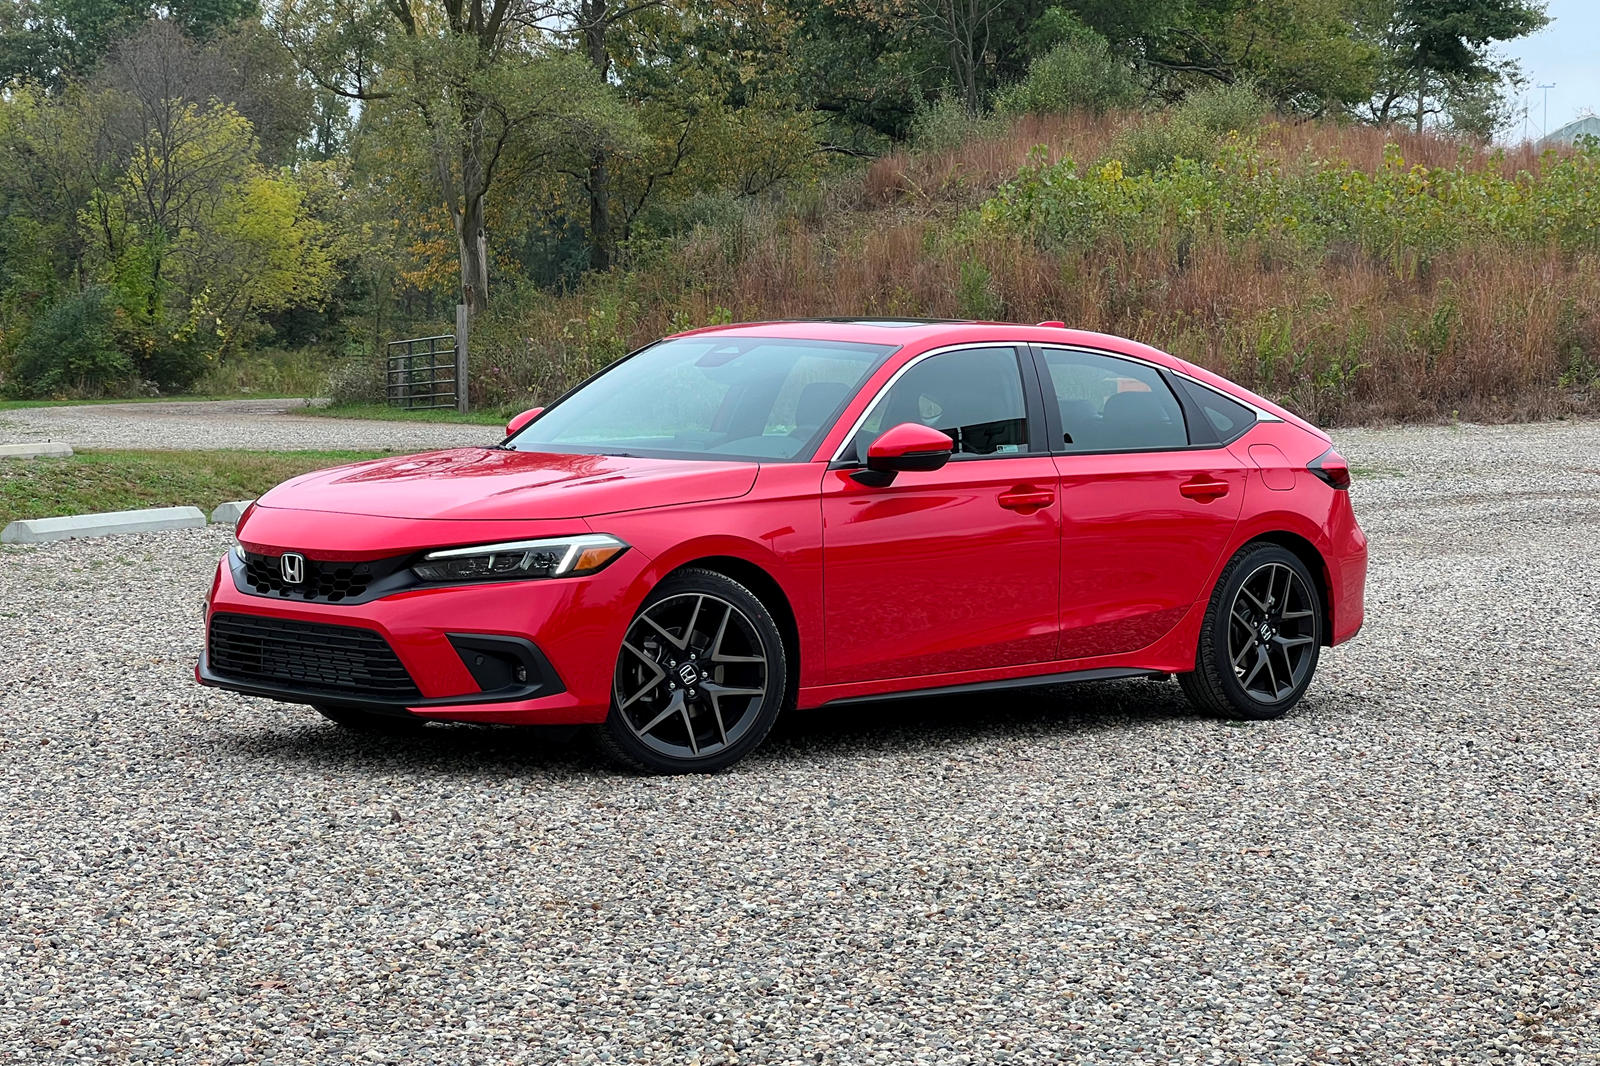 2023 Honda Civic Review, Pricing, & Pictures